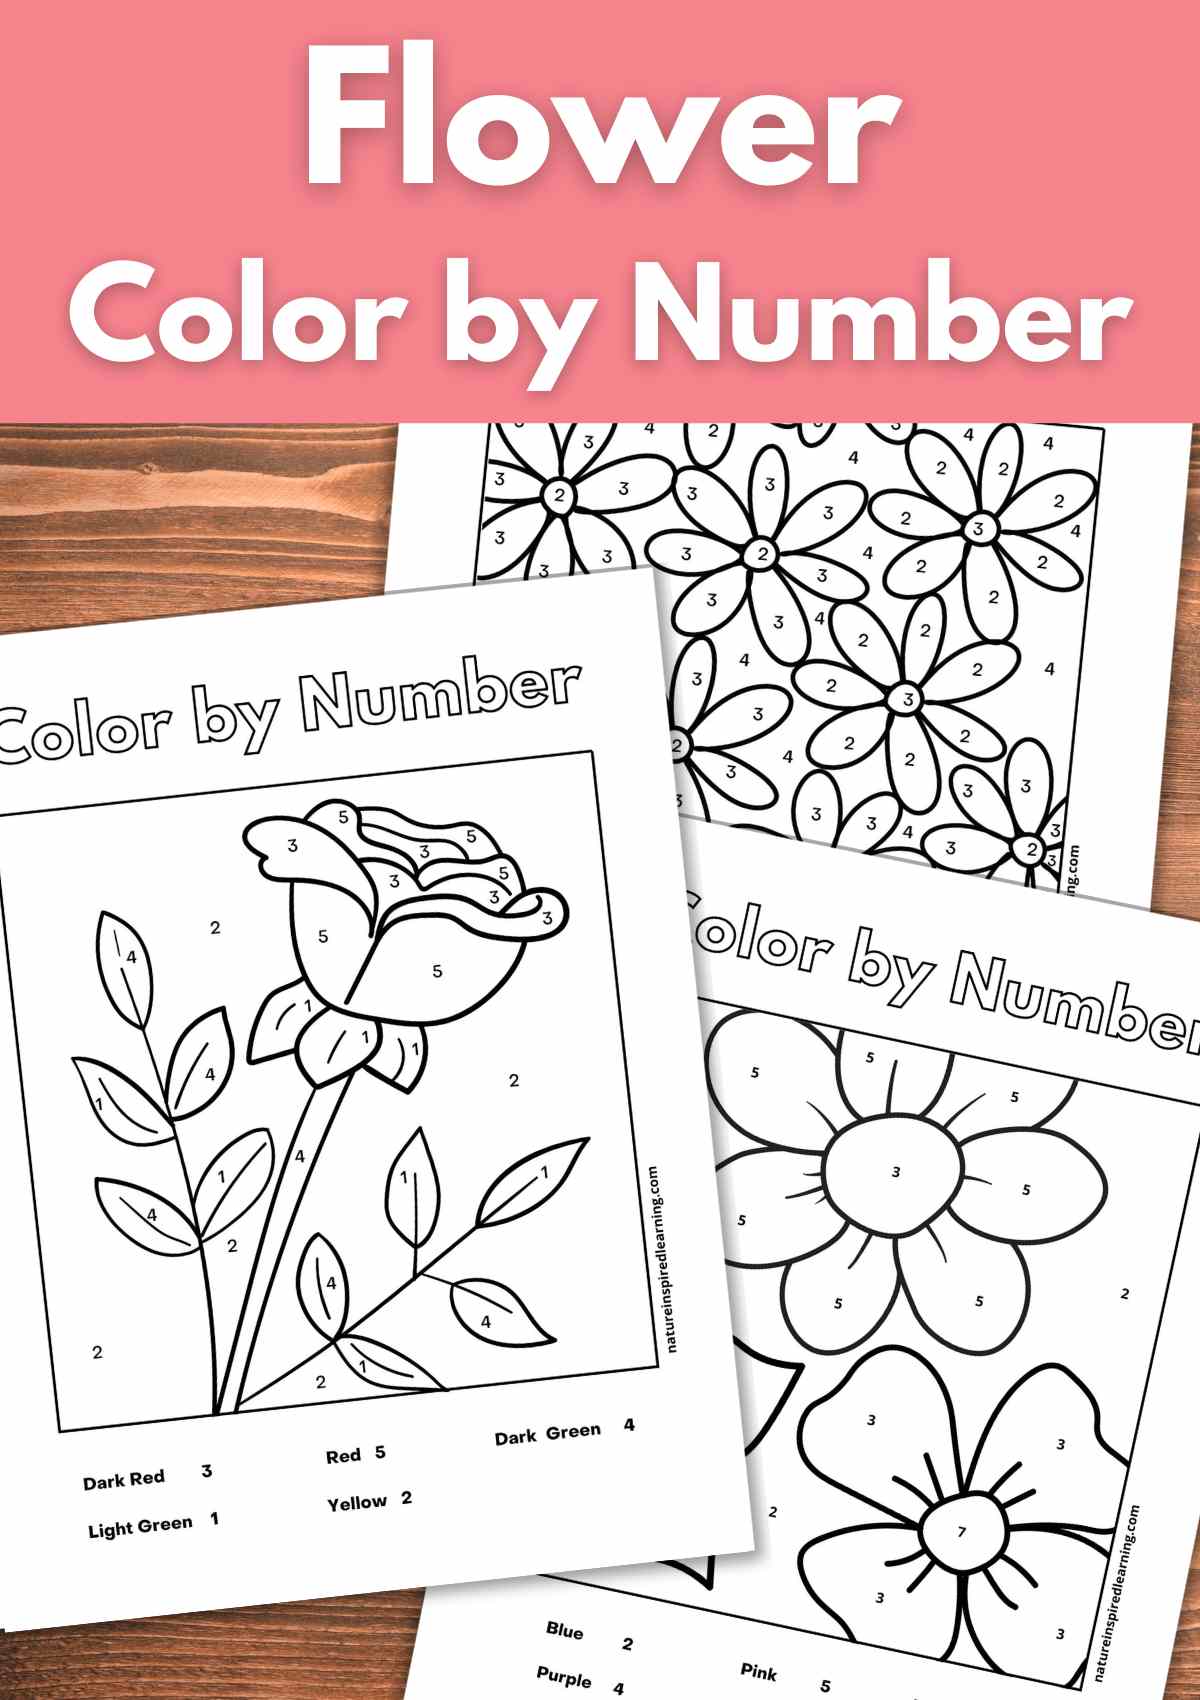 Flower Color by Number - Nature Inspired Learning